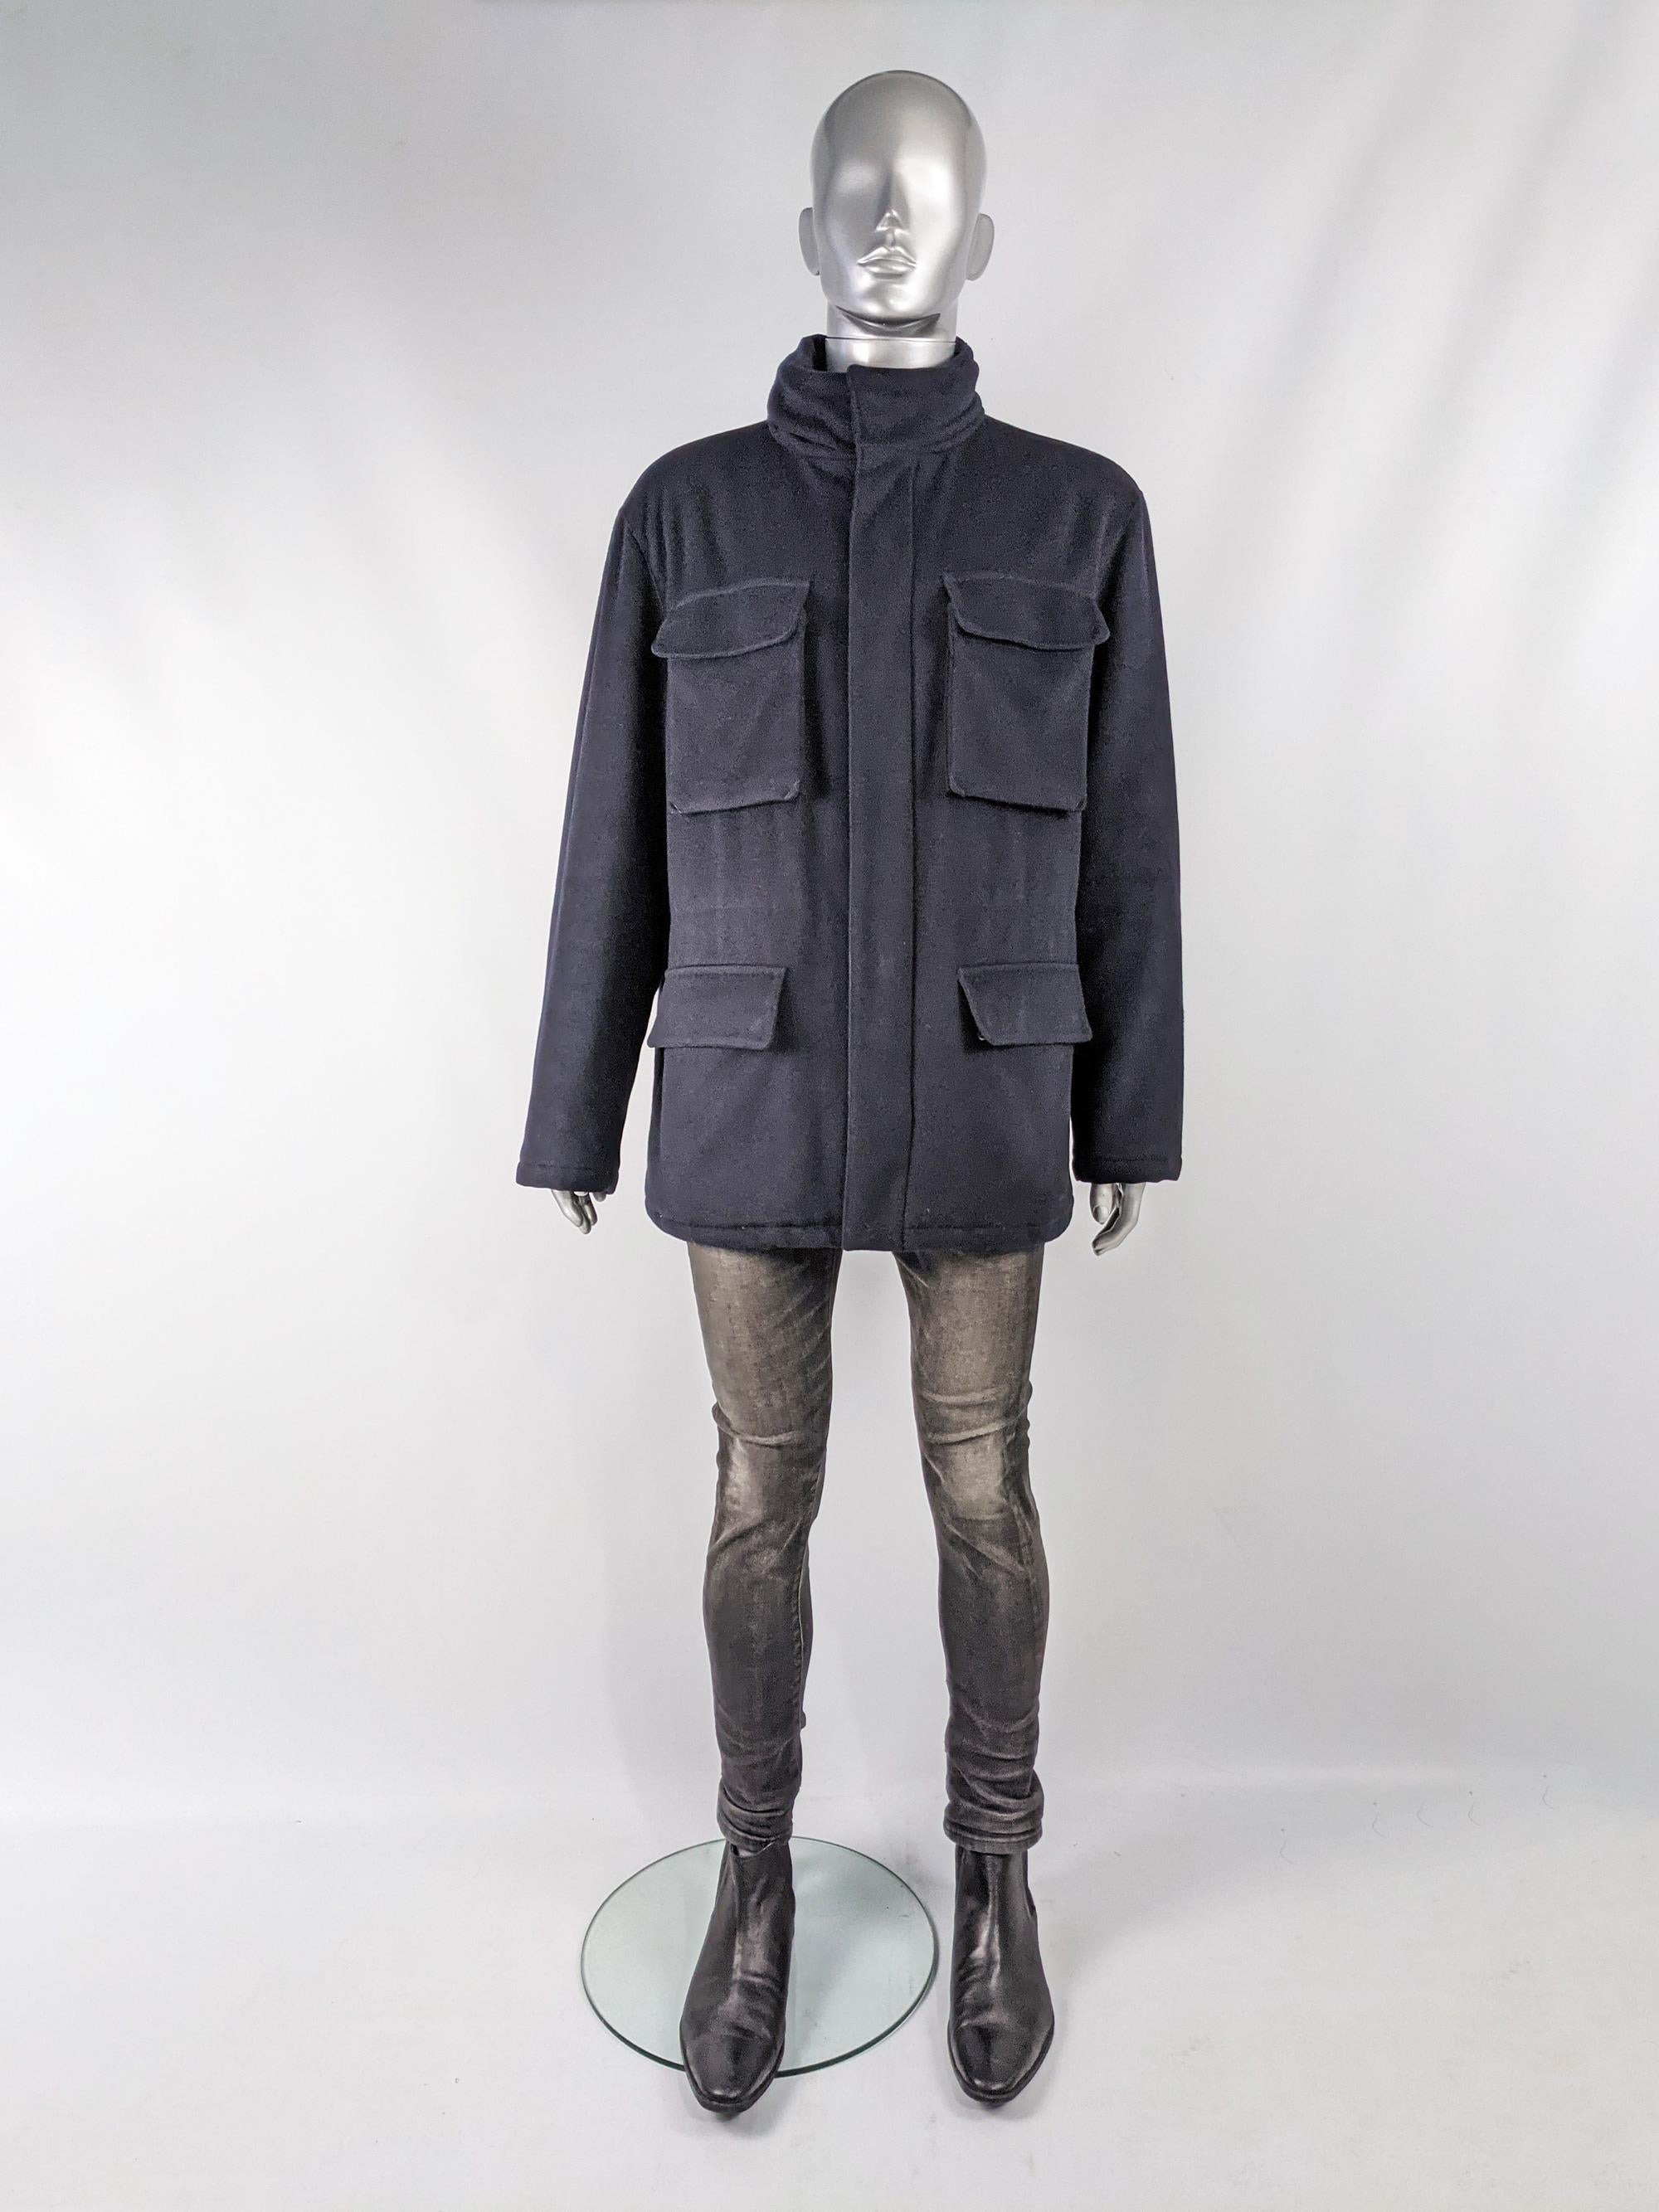 An amazing and rare vintage Valentino mens coat from the 90s in a navy blue wool and cashmere fabric with four excellent utility style pockets, a drawstring on the interior that pulls in the waist for a trimmer silhouette and a high funnel neck that